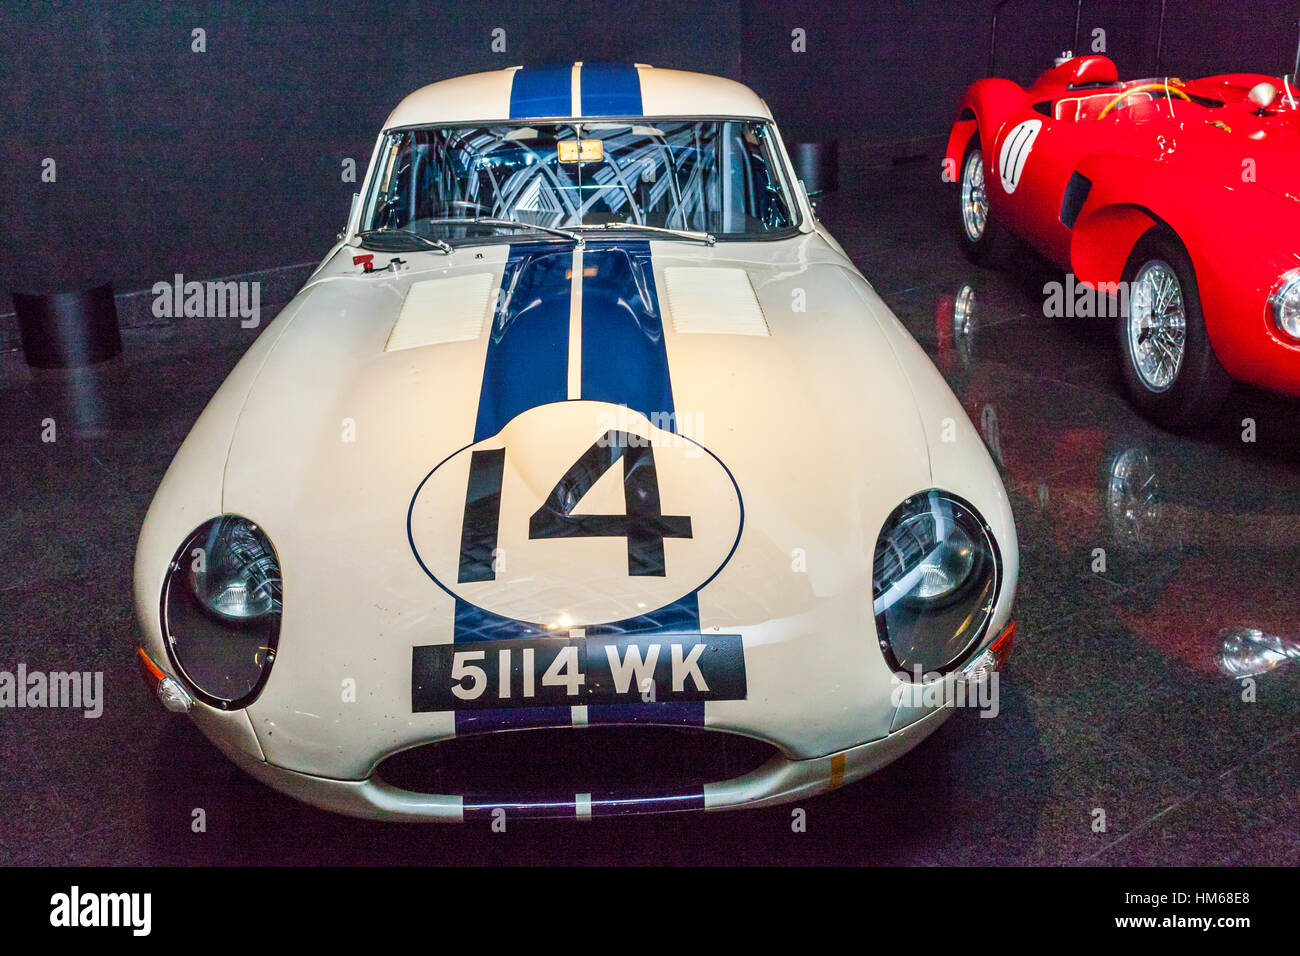 A 1961 Jaguar XK-E factory race car at the with an all alloy body.  Raced by Briggs Cunningham. Stock Photo